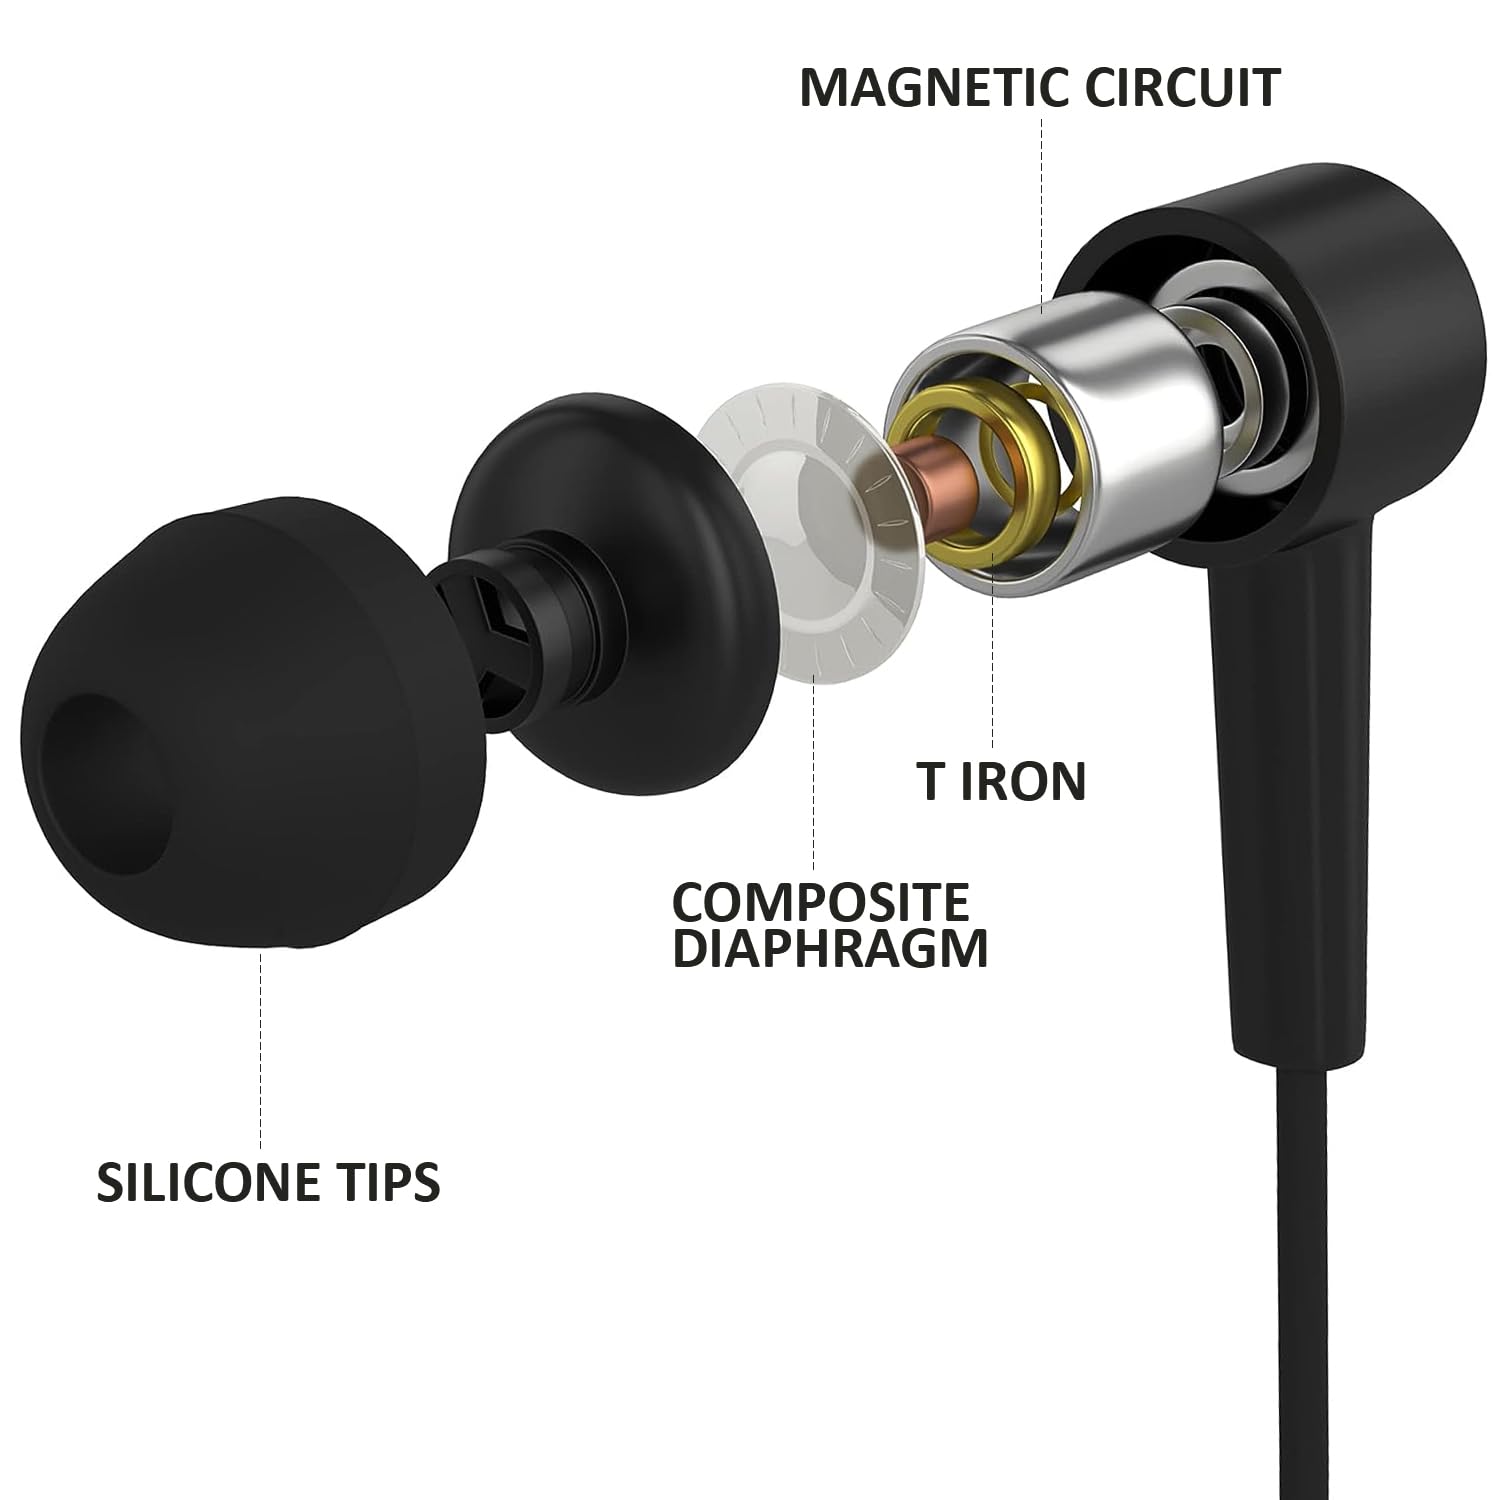 Maeline Bulk Earbuds 5 Pack Black in-Ear Stereo Headphones for School Classroom, Library, Travel, Gym 3.5mm Jack, Tangle-Free Wired Earphones for MP3, Phones, Computer and Laptops